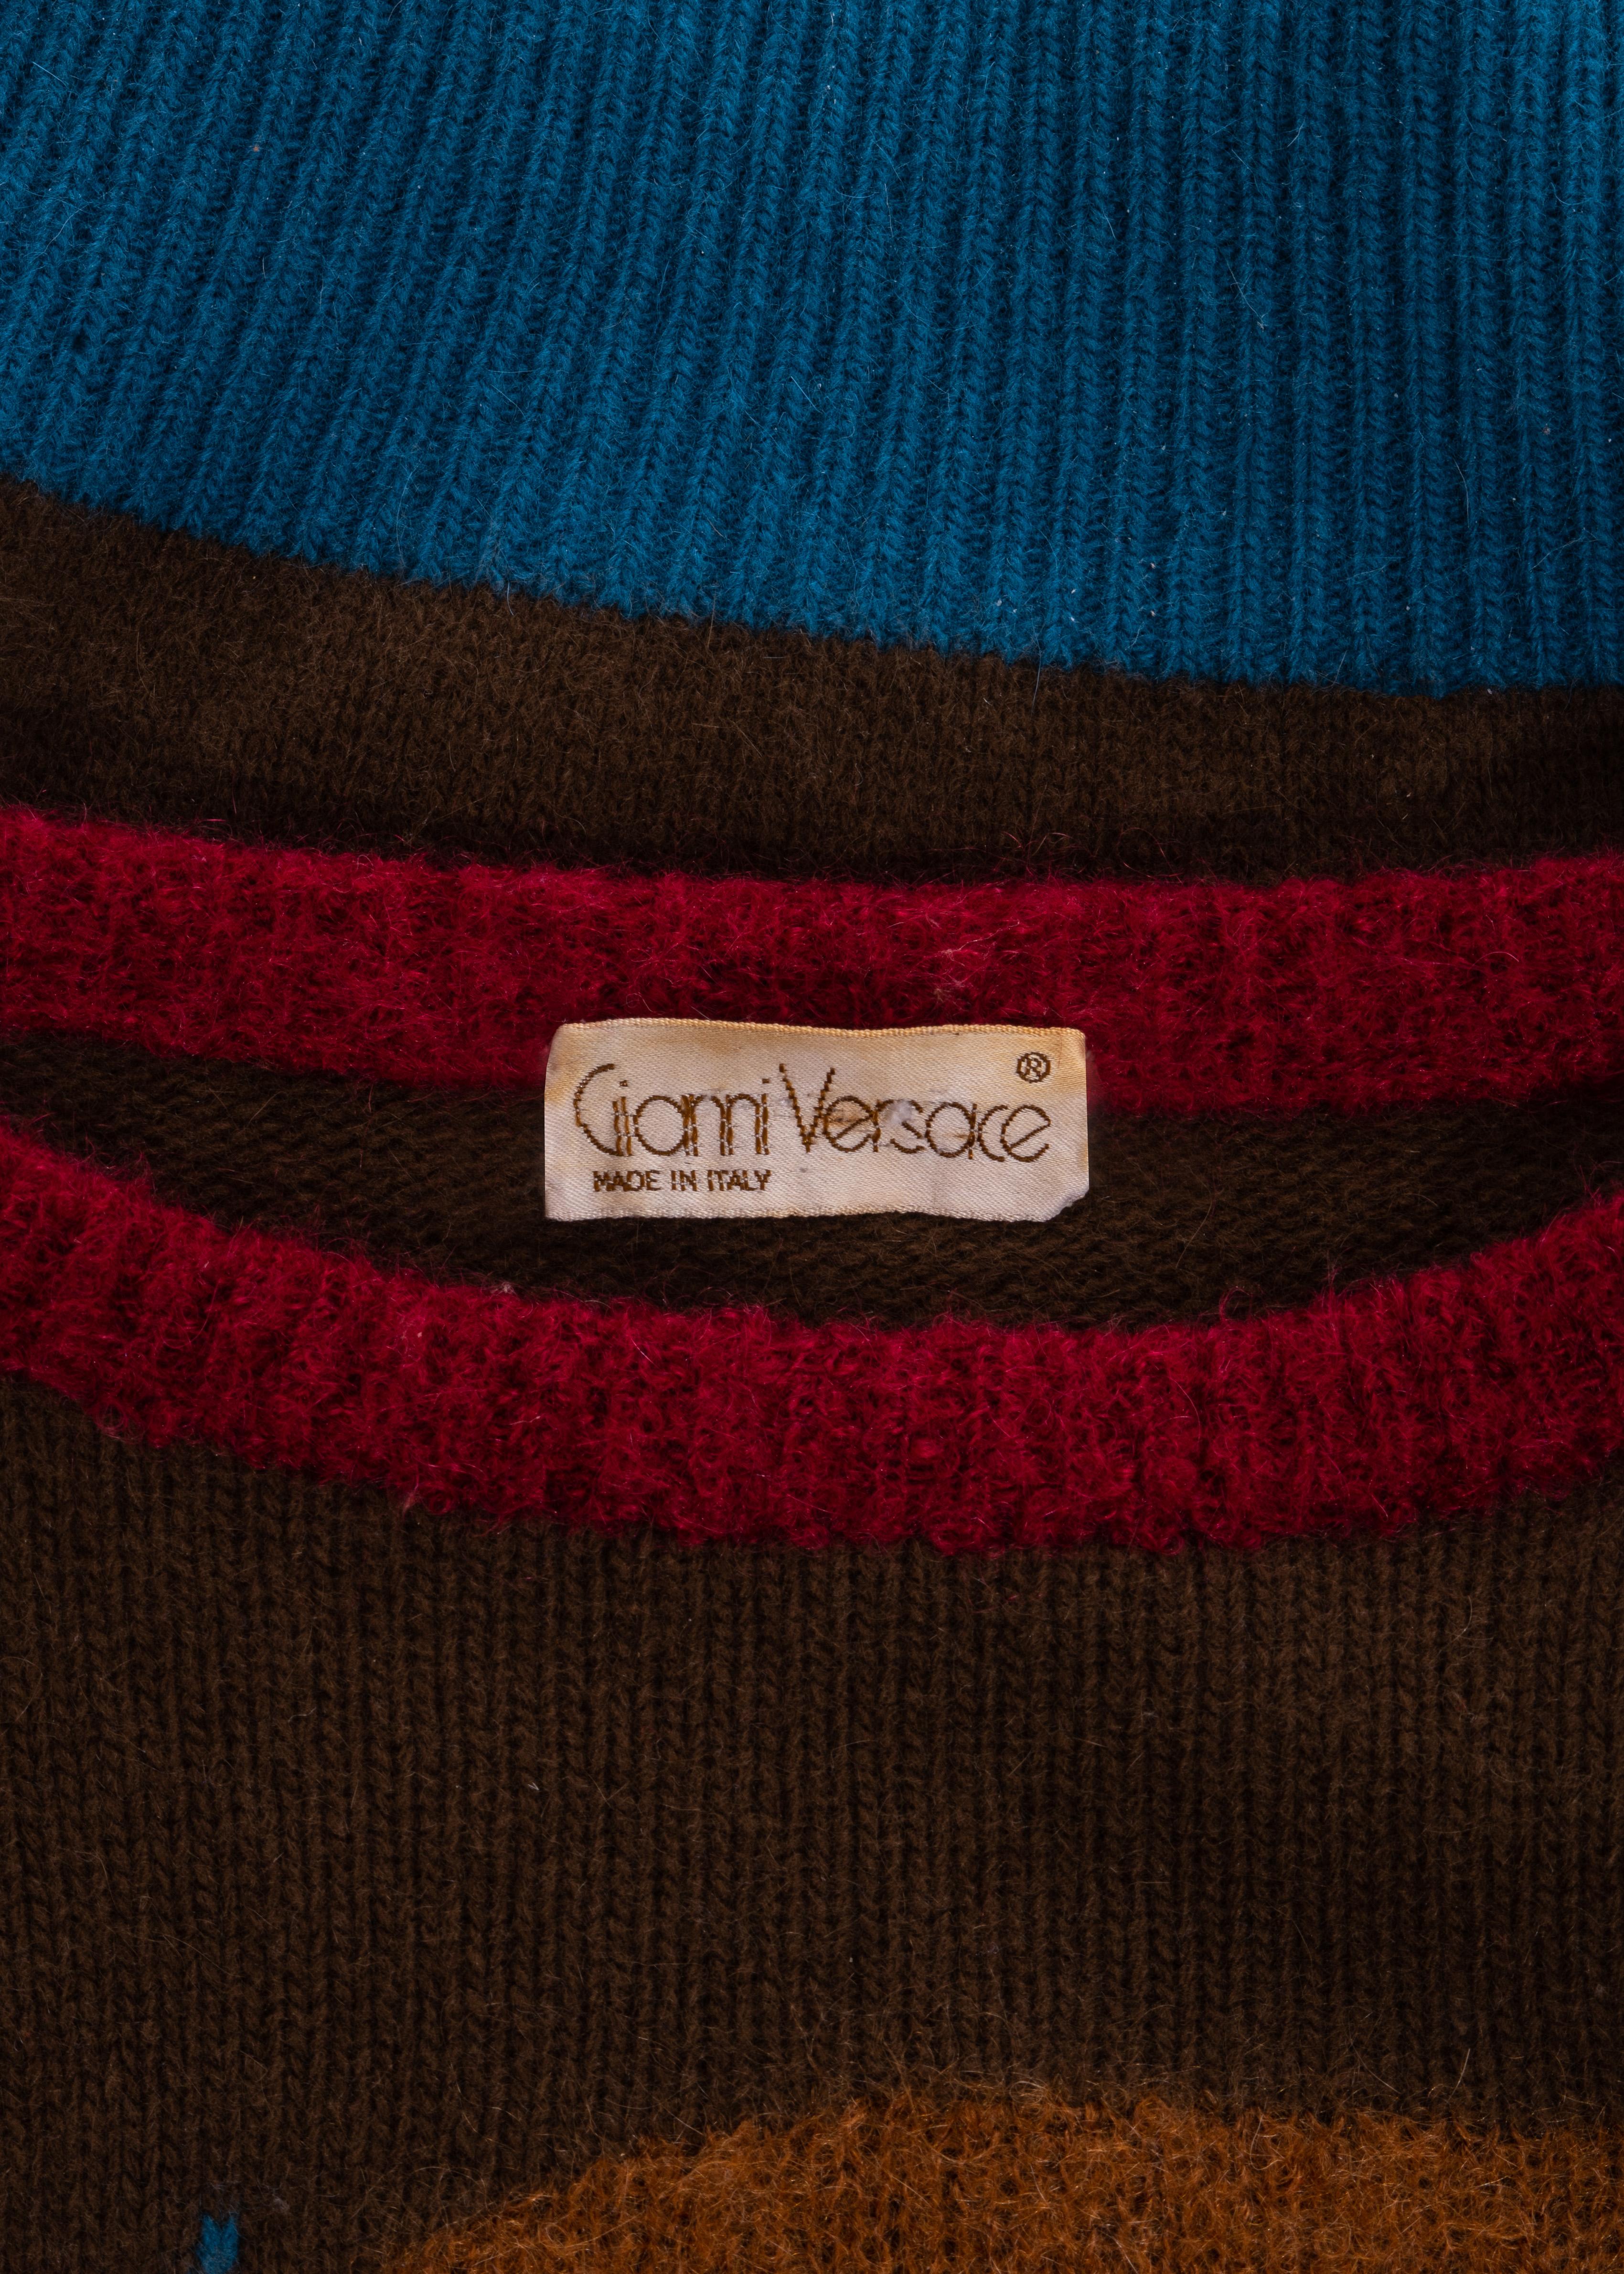 Gianni Versace multicoloured knitted mohair sweater, fw 1982 1